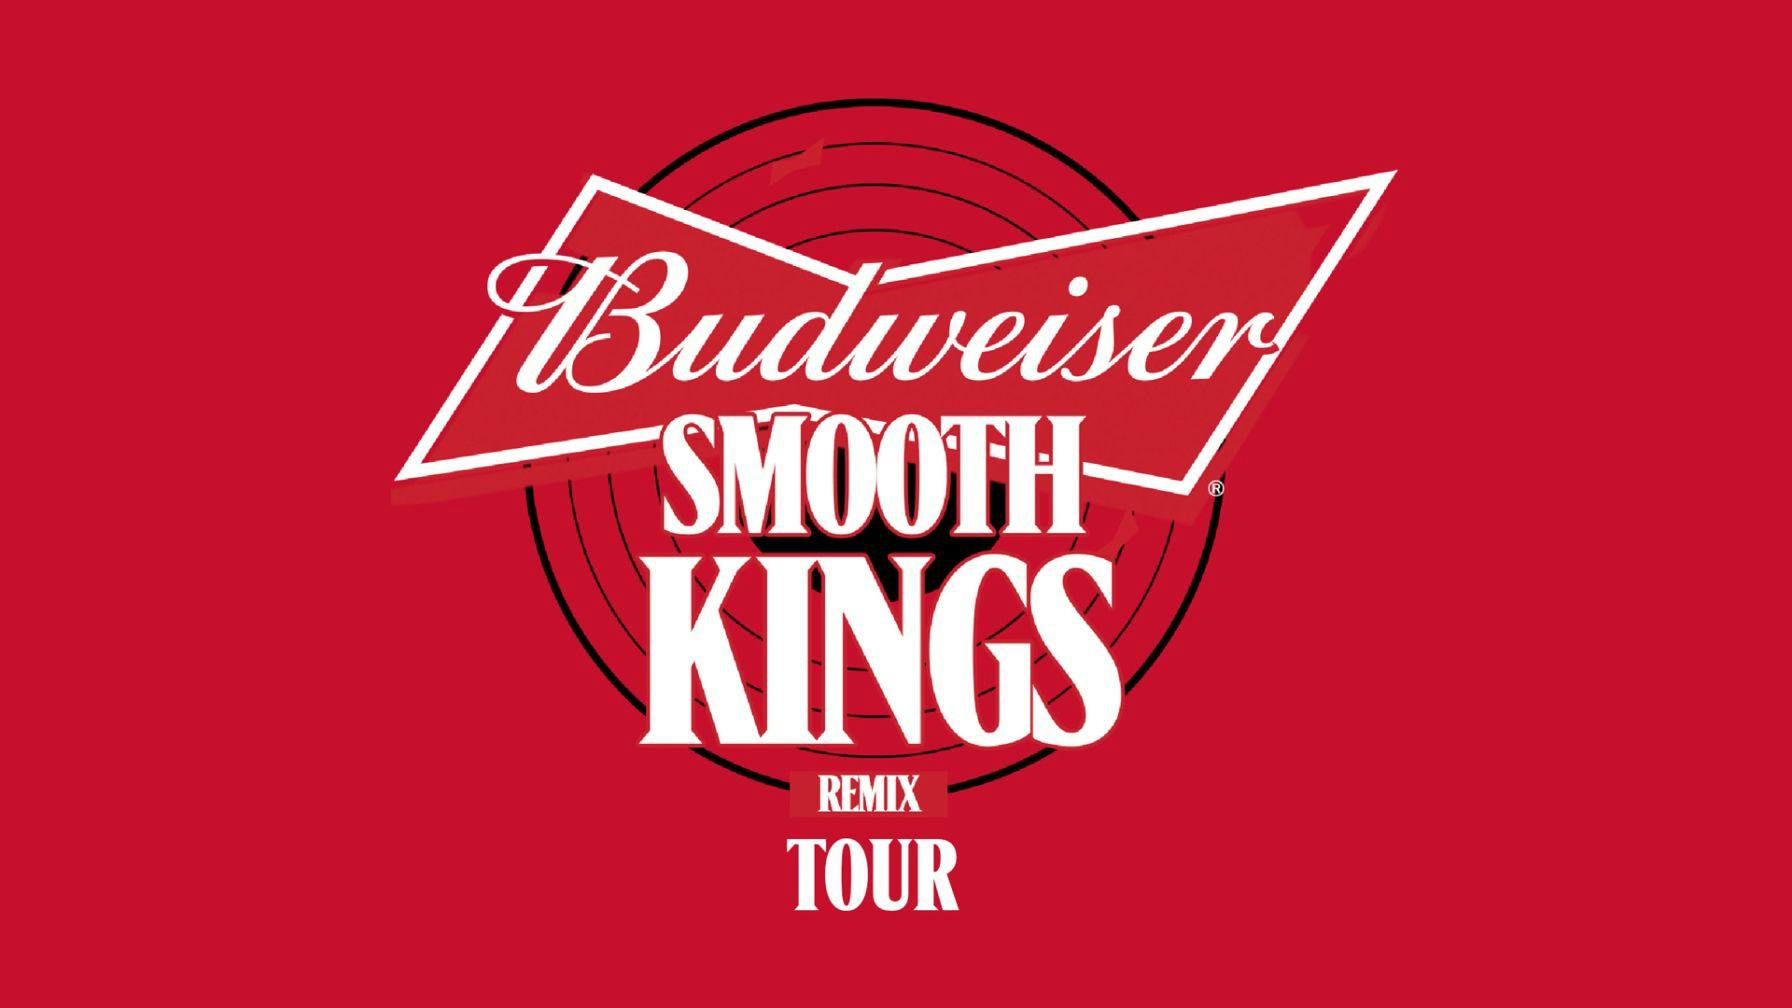 Budweiser Smooth Kings Remix 2 Poster in Red